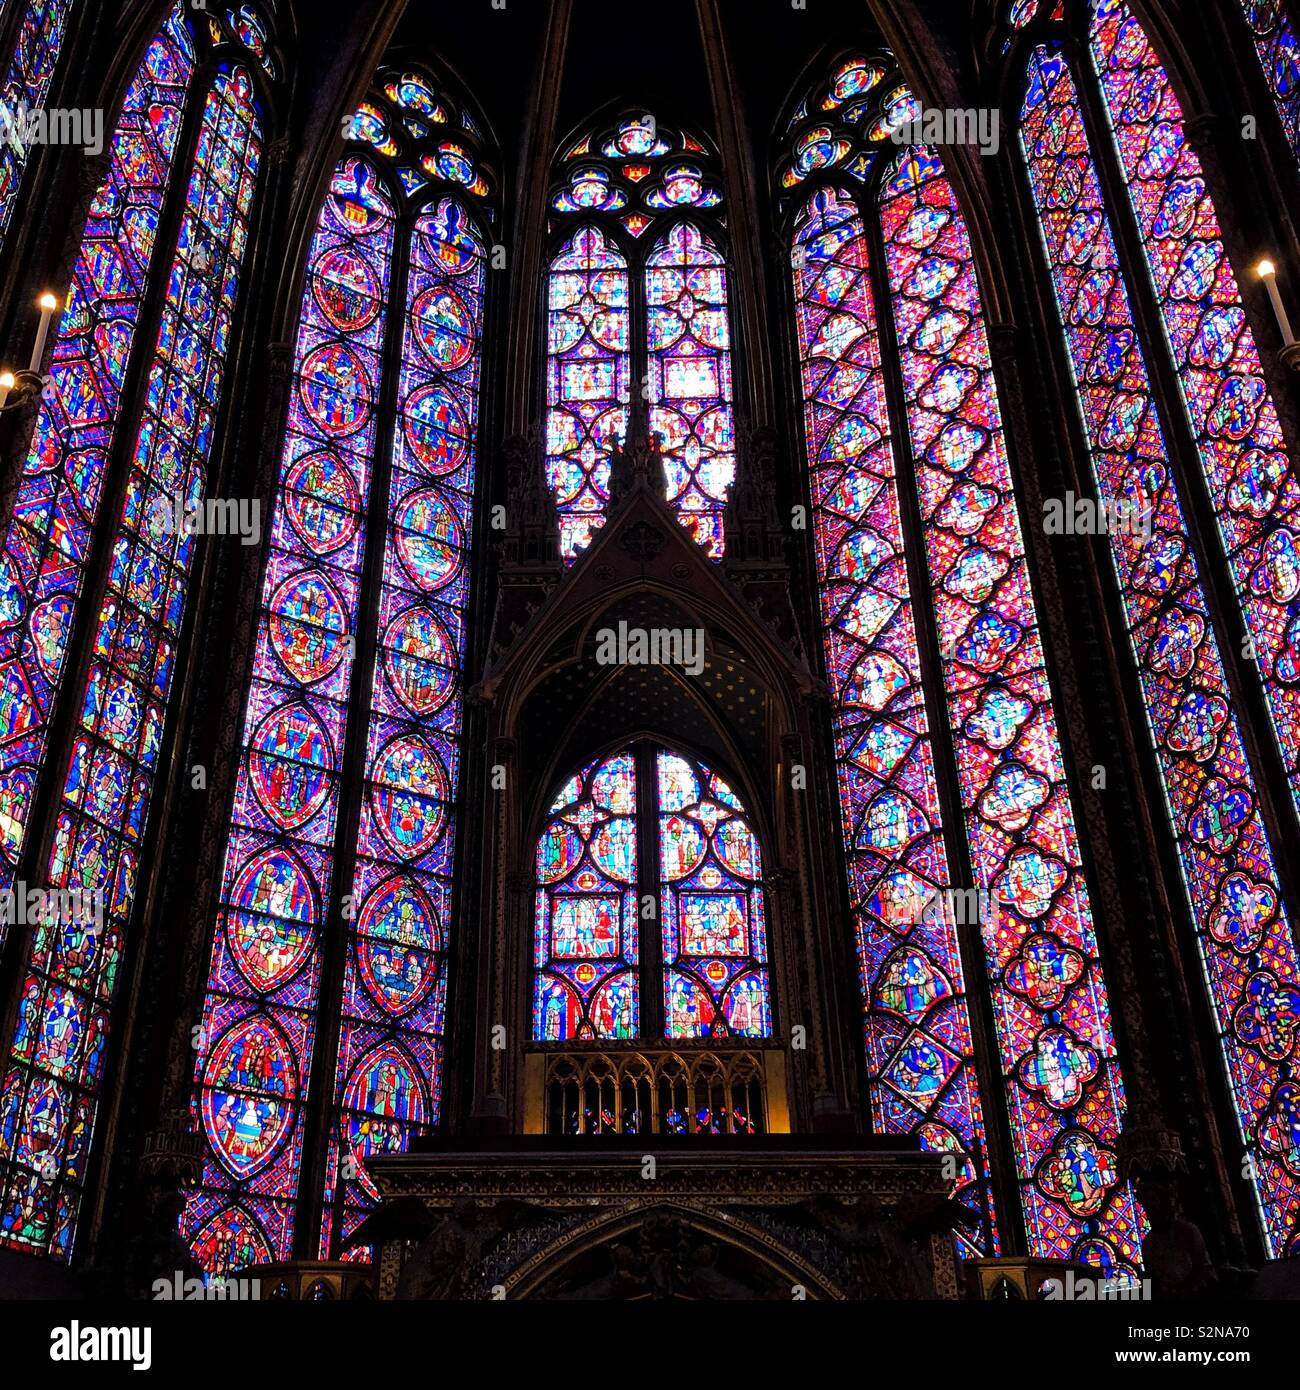 Stained glass windows behind the altar inside magnificent Sainte Chapelle, a royal chapel in the Gothic style, within the medieval Palais de la Cité, the residence of the Kings of France Stock Photo